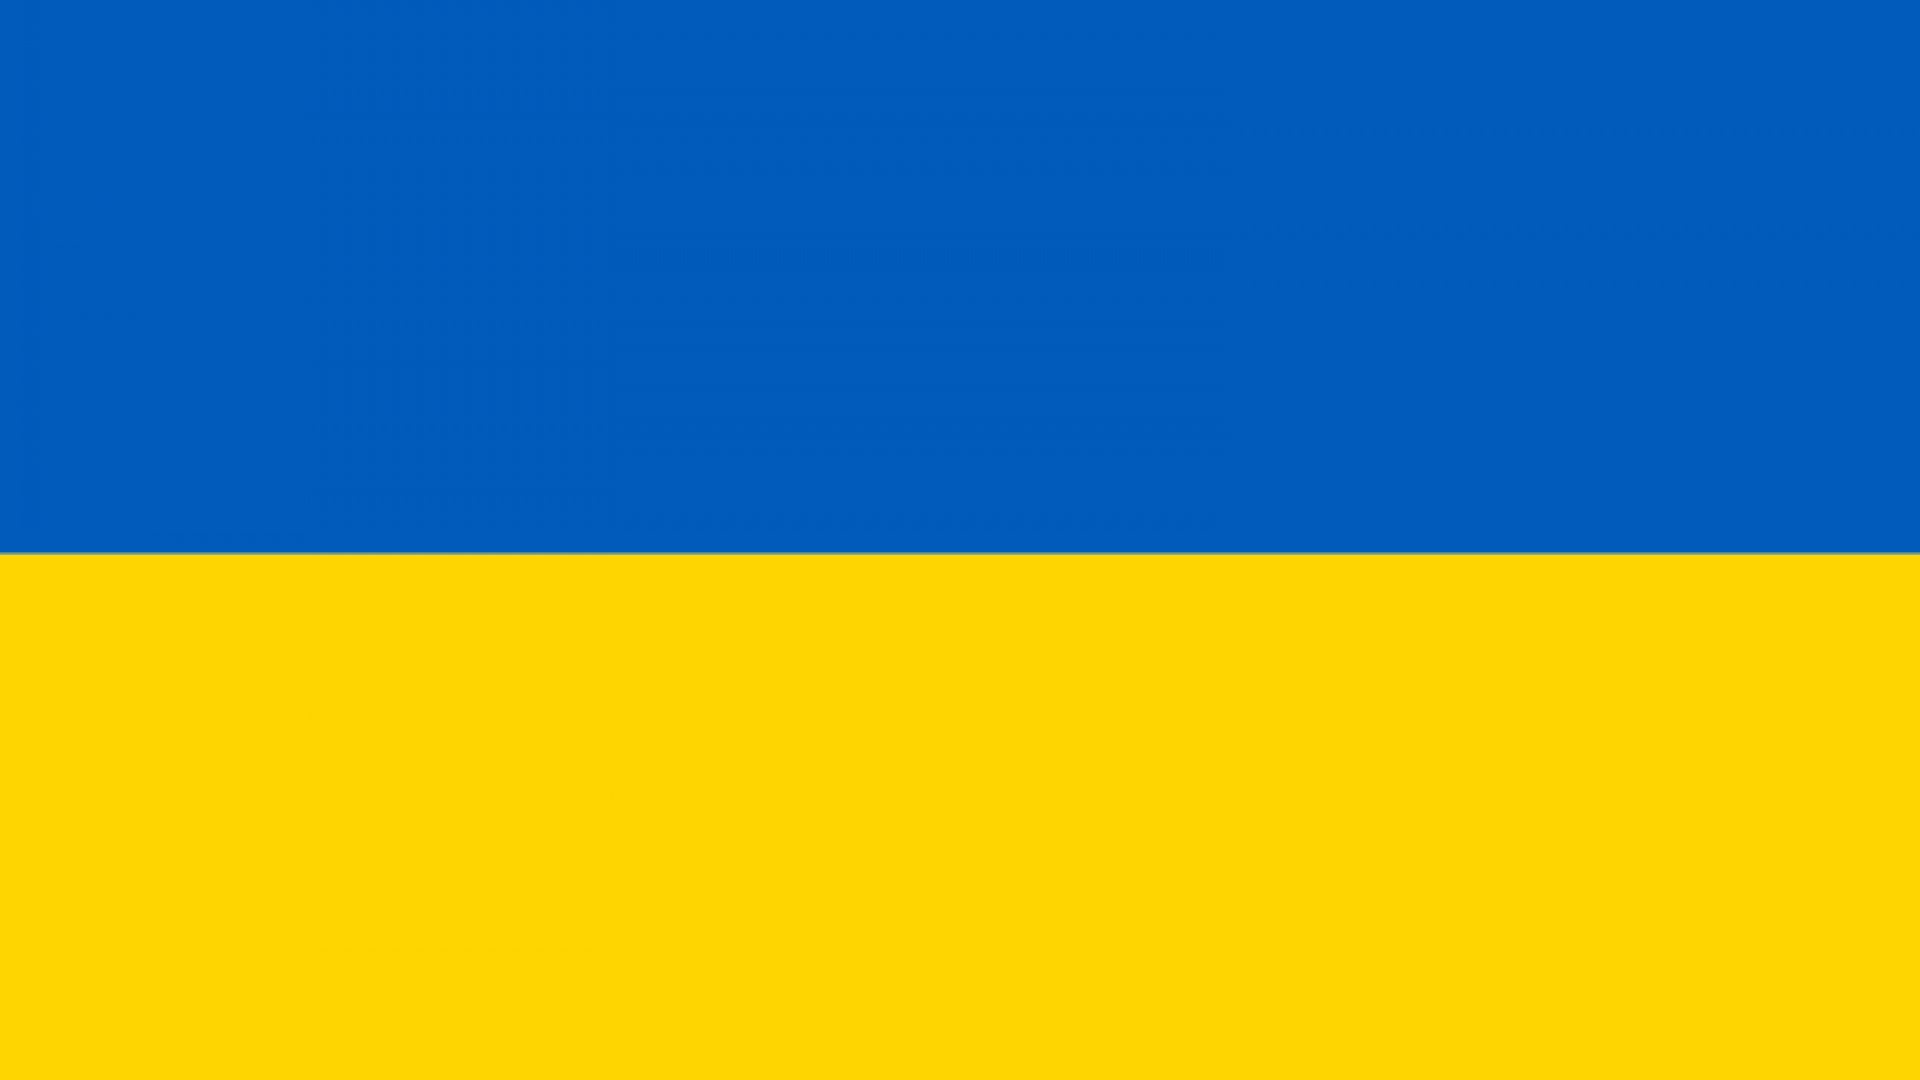 Statement of the IAH CAS on the situation in Ukraine and current forms of support in the scientific field